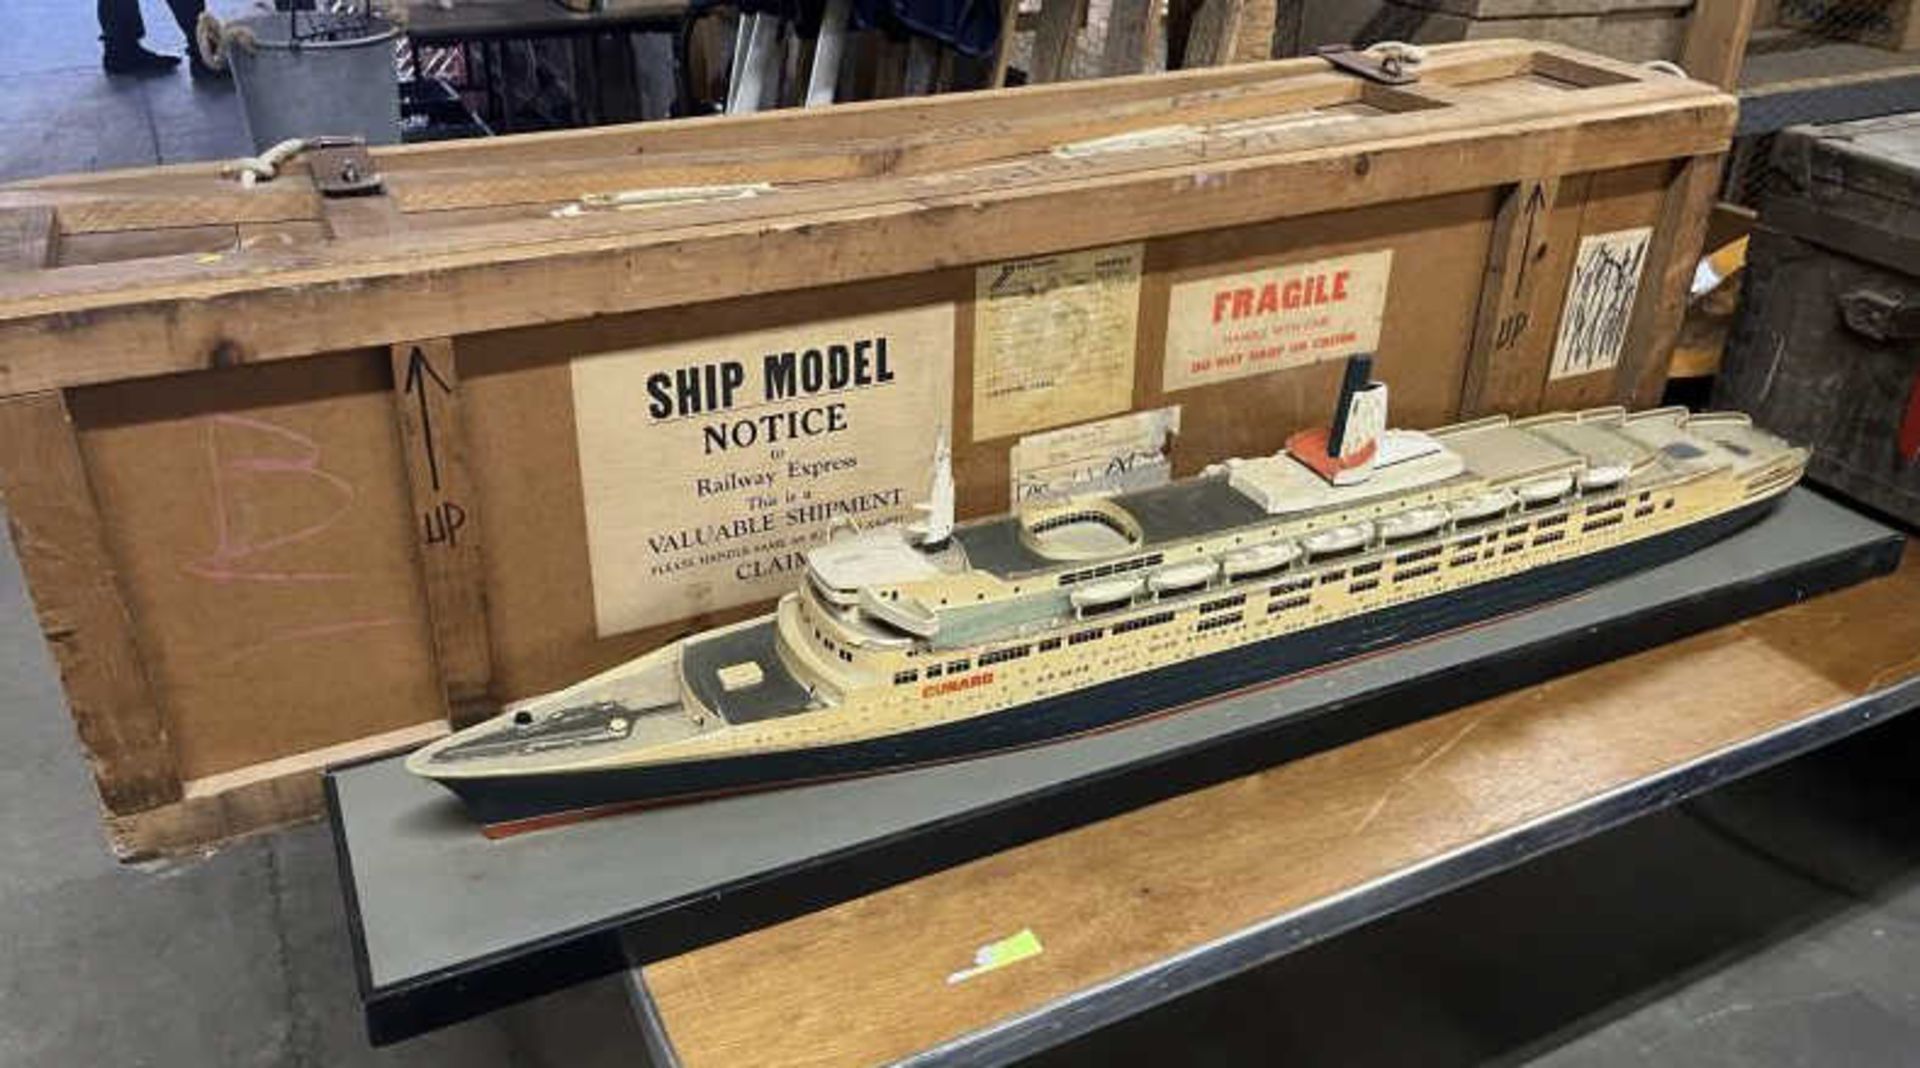 Queen Elizabeth 2 Ship Model with Original Shipping Crate, Missing (6) Life Boats, Paint Loss on - Image 2 of 14